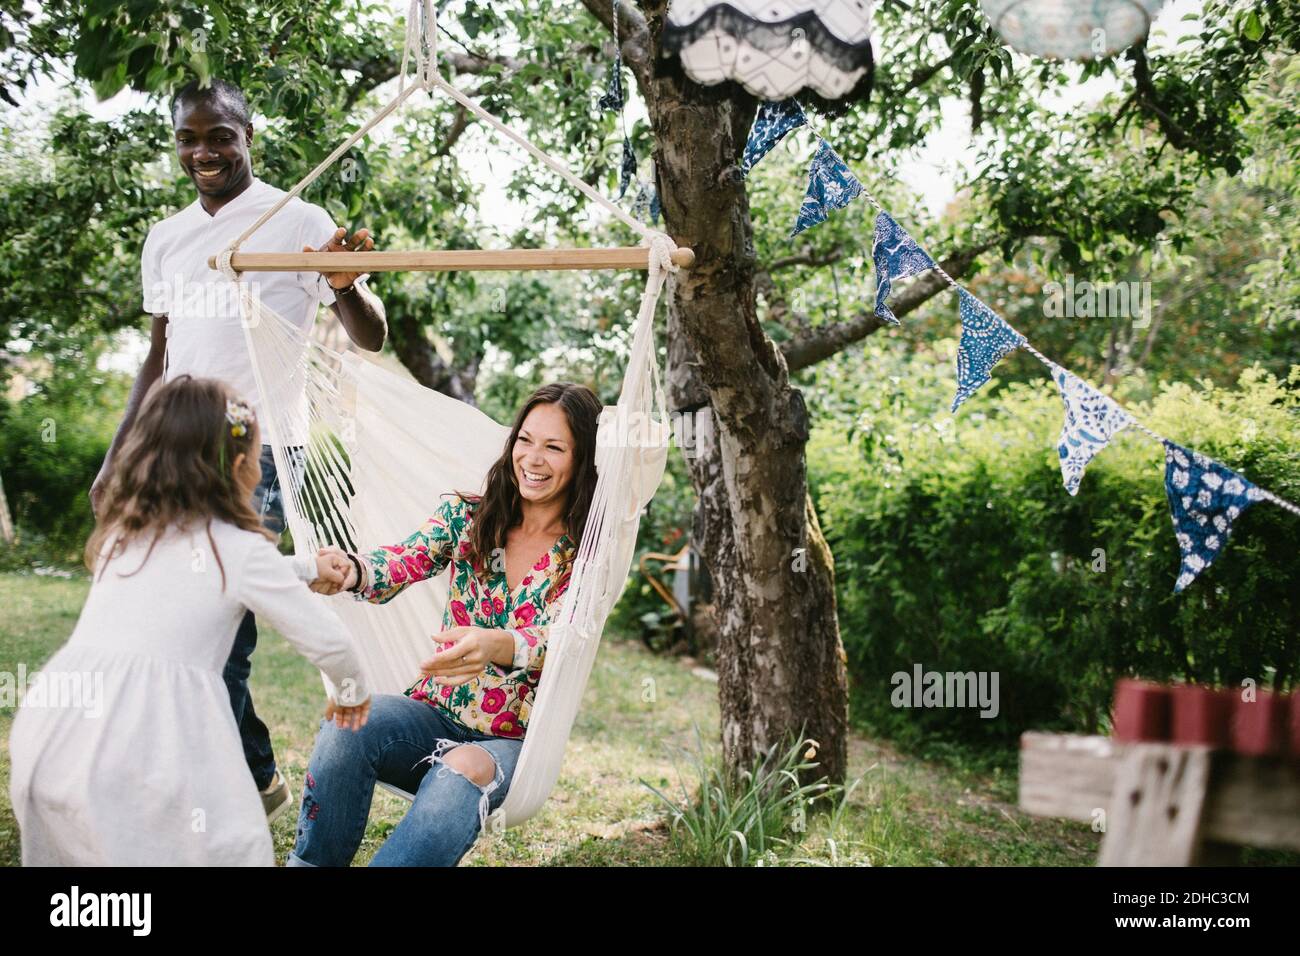 Father pushing hammock while happy woman holding hand of daughter in backyard Stock Photo